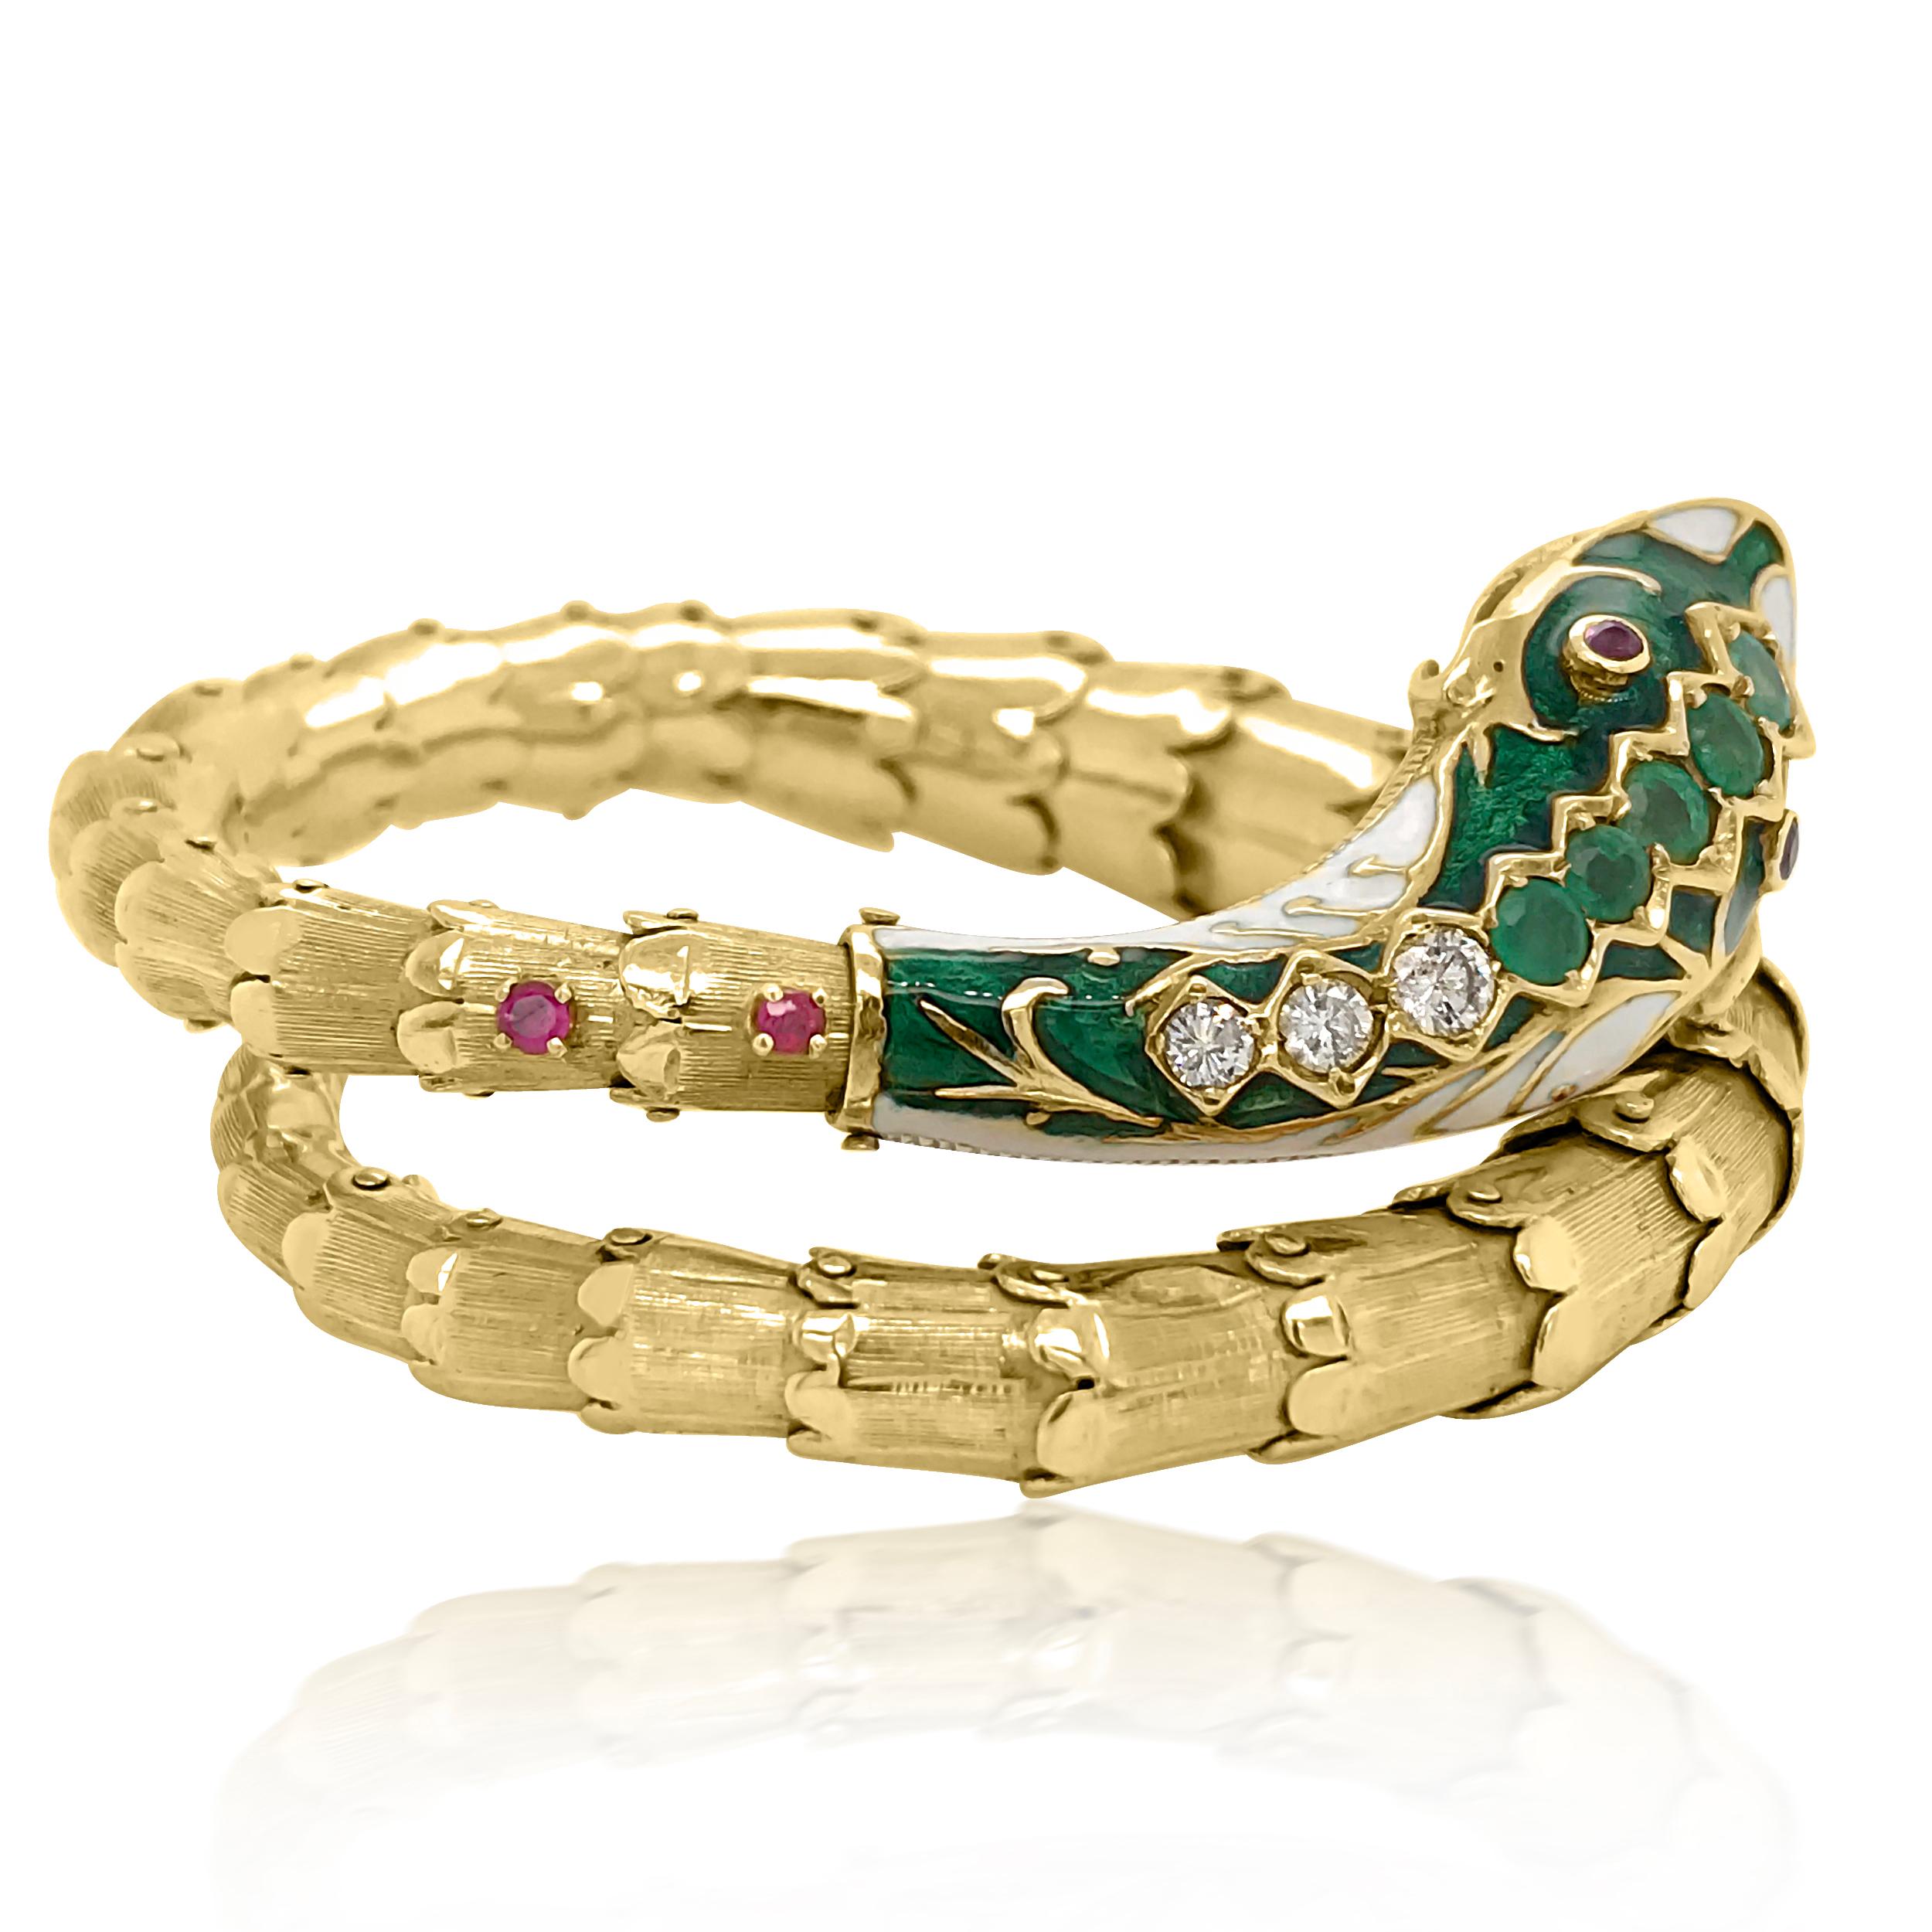 This stylish unique Victorian enamel, diamond, and ruby snake bangle bracelet is crafted in 14-karat gold. Depicting a scaled snake artistically rendered in vibrant green and white enamel. The snakes head is composed of 5 round emerald weighing